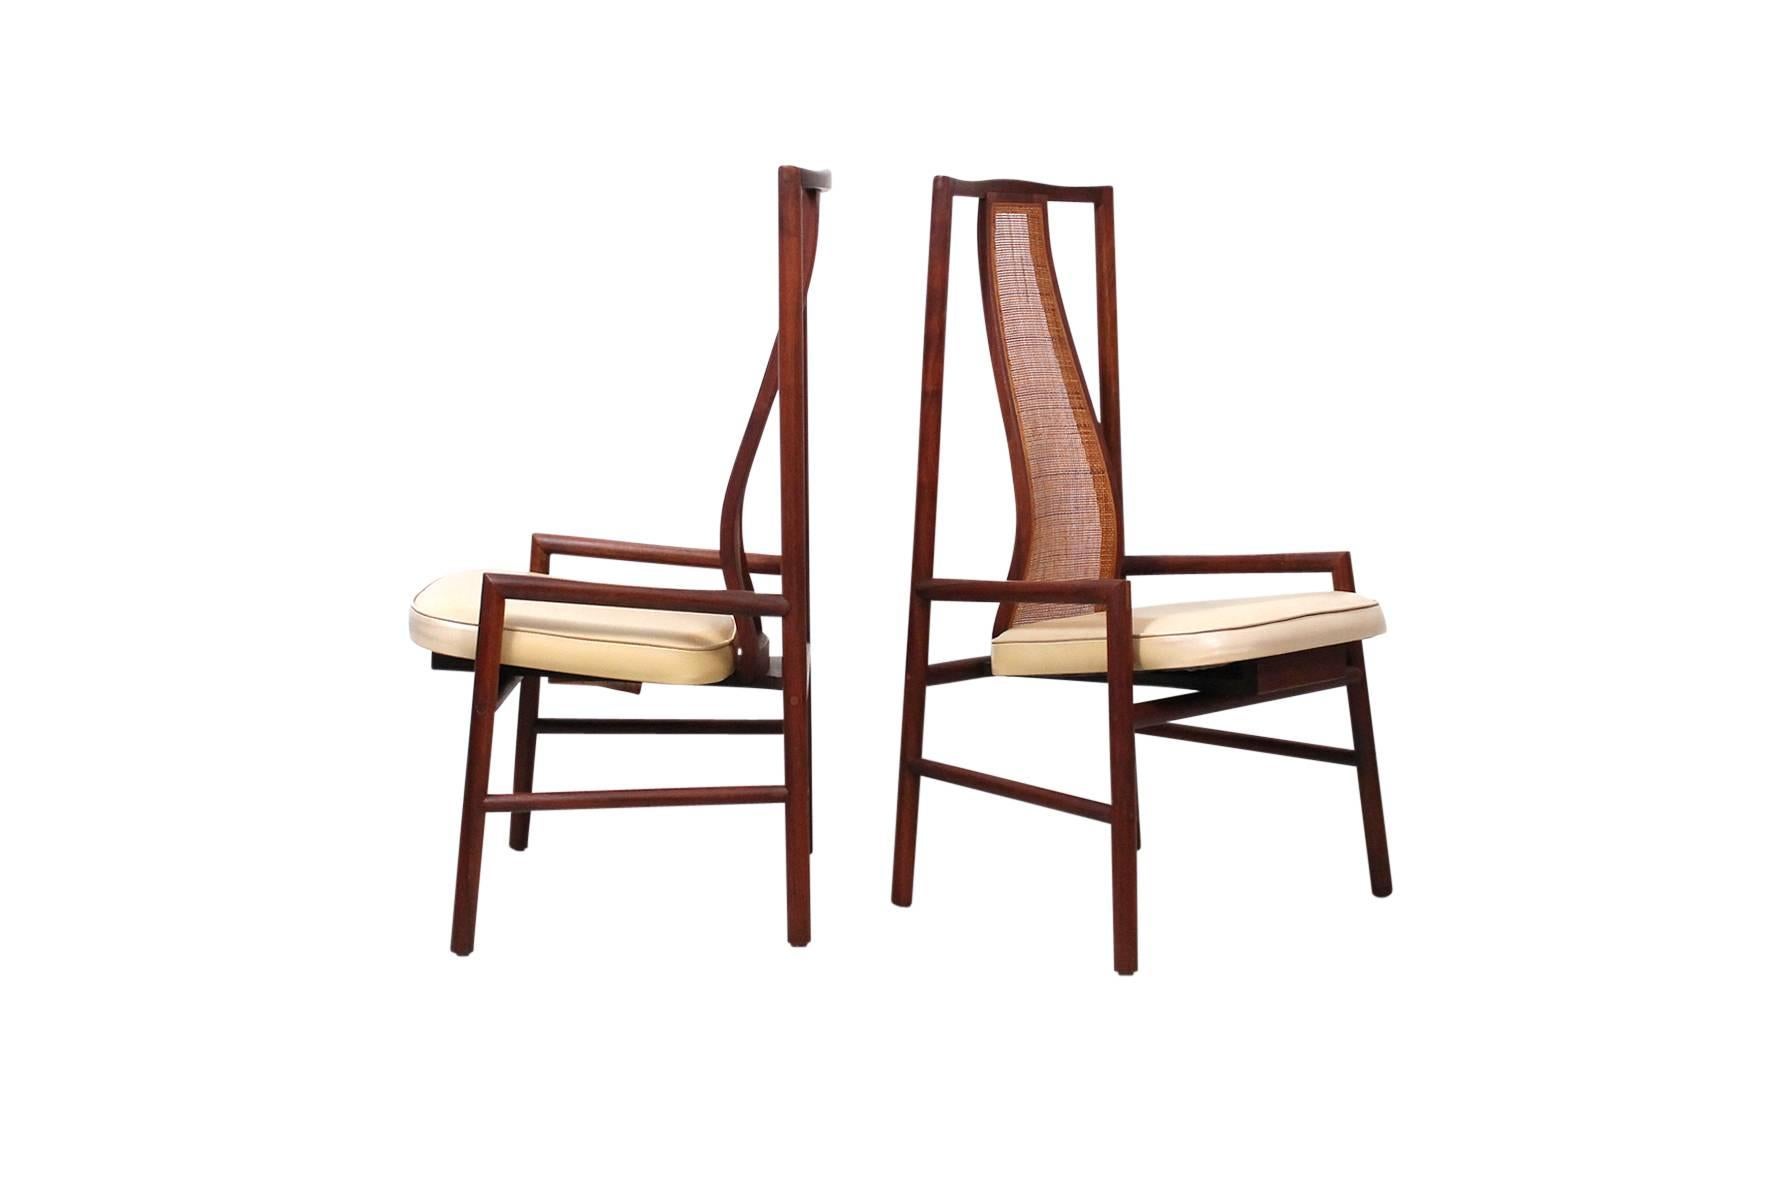 Pair of walnut and cane chairs designed by John Kapel for Glenn of California. This seldom seen design by Kapel features a sculptural caned backrest and artful joinery. One example retains original paper label.